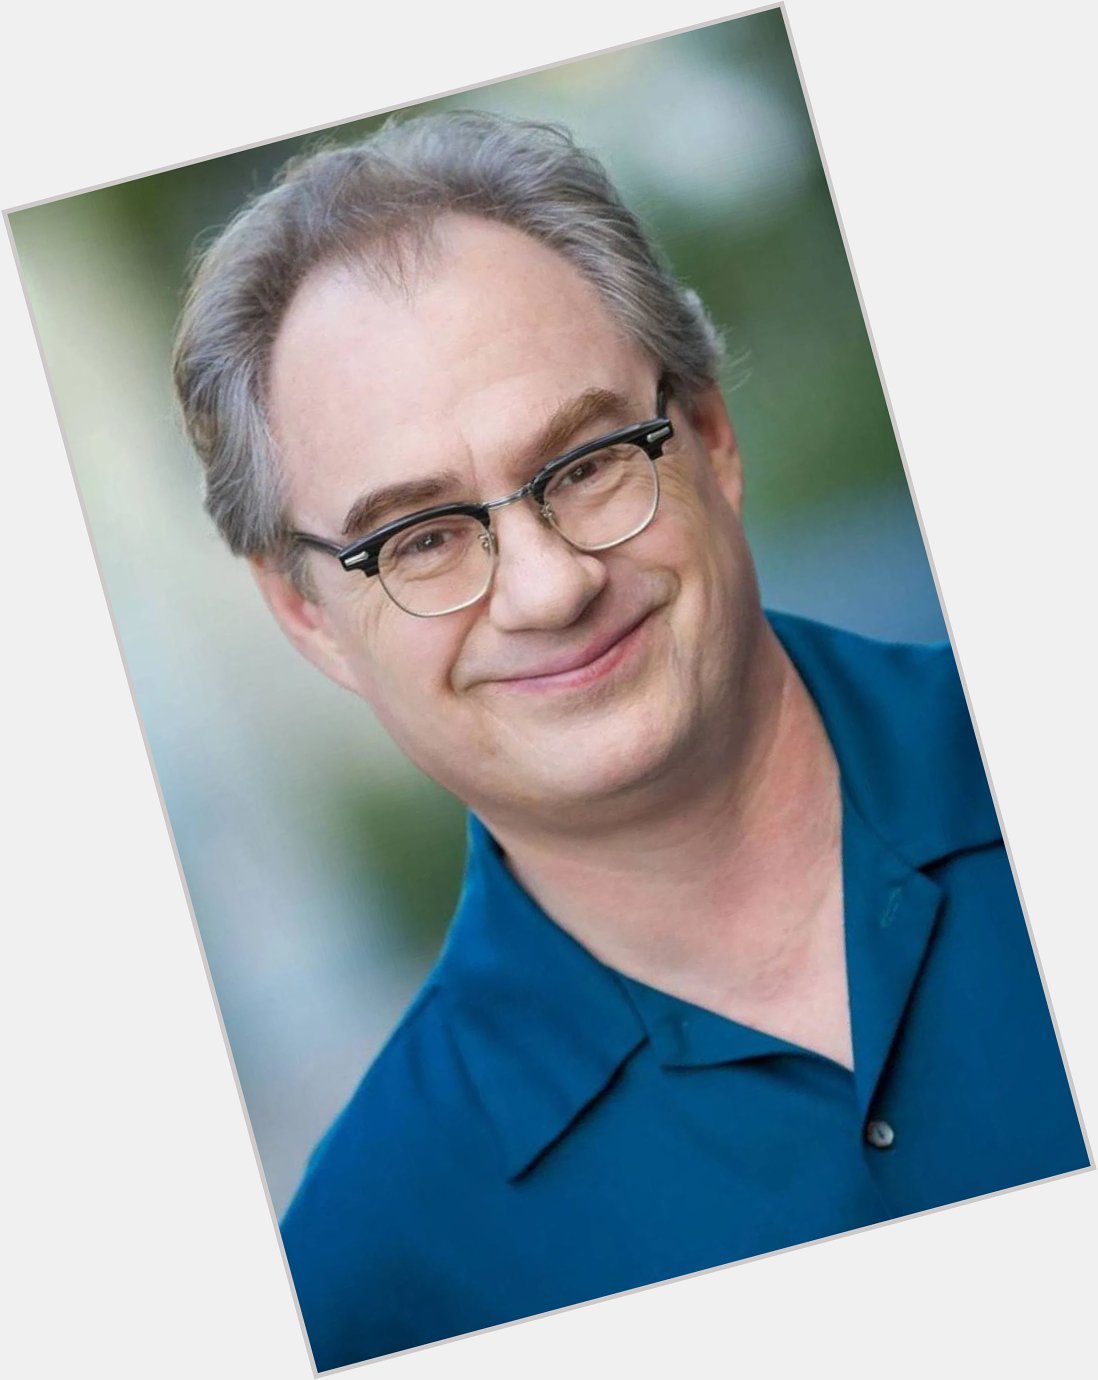 (May 20) Happy Birthday to John Billingsley who played Doctor Phlox on 